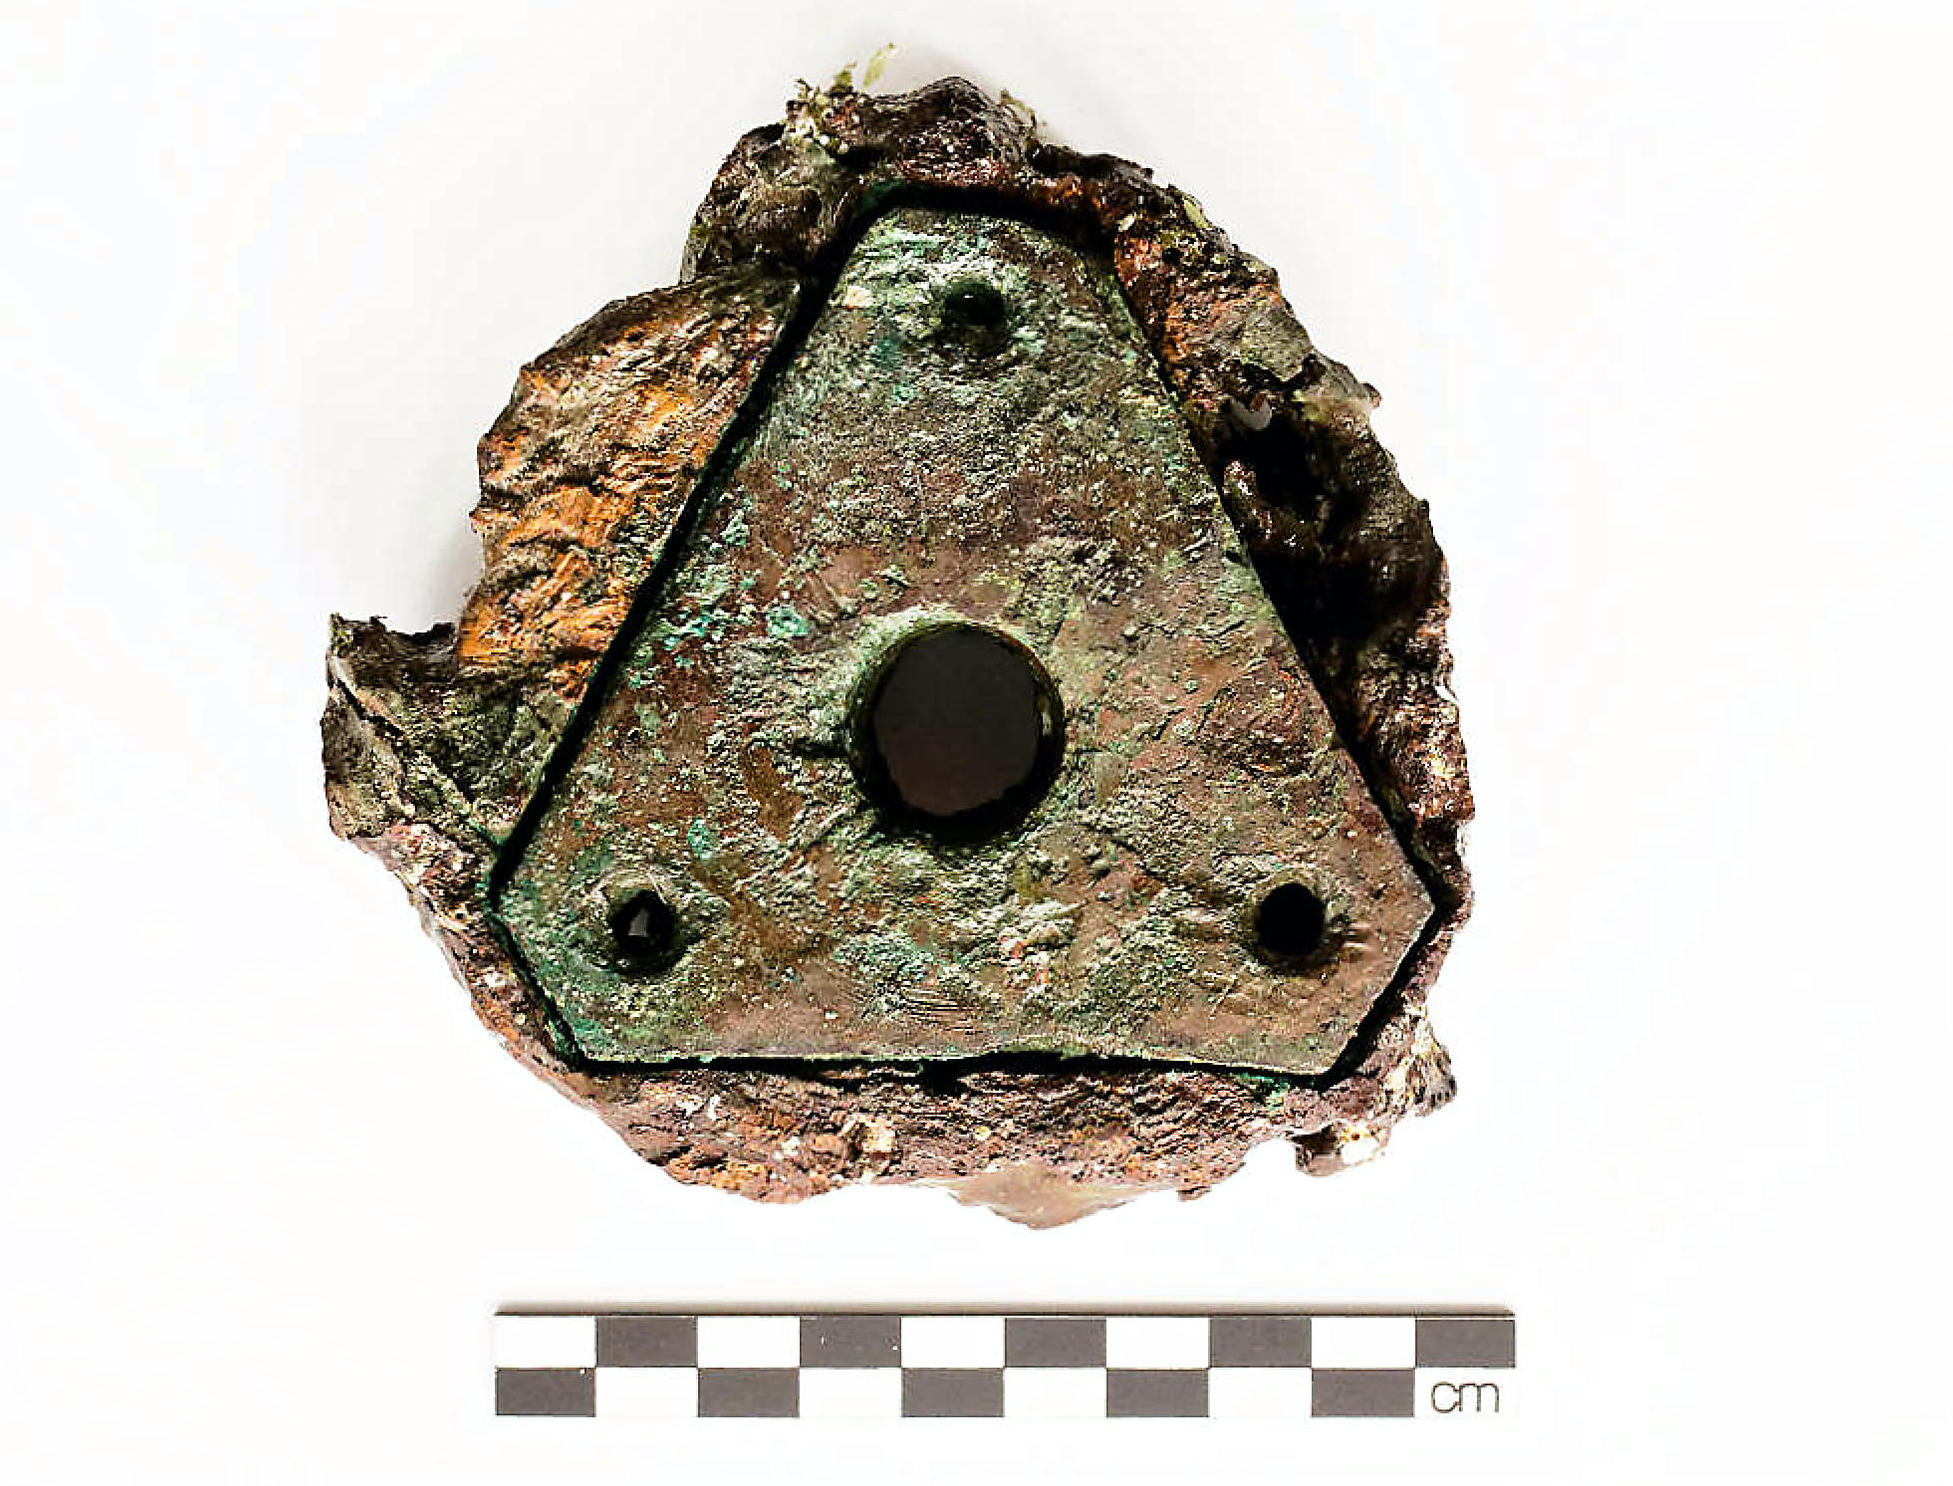 Photo of the conserved remains of wood sheave with copper-alloy coak (F21). The coak is countersunk into the surface of the remains of the wooden sheave. The coak has a green and brown colour, roughly triangular in shape, but with each point cut off, giving it three long sides and three short sides. A large hole runs through the middle of the object, with three smaller holes at each flattened point. The brown remains of wood sheave cling to the metal of the coak. A black and white centimetre scale is included to indicate a rough width of 10cm.